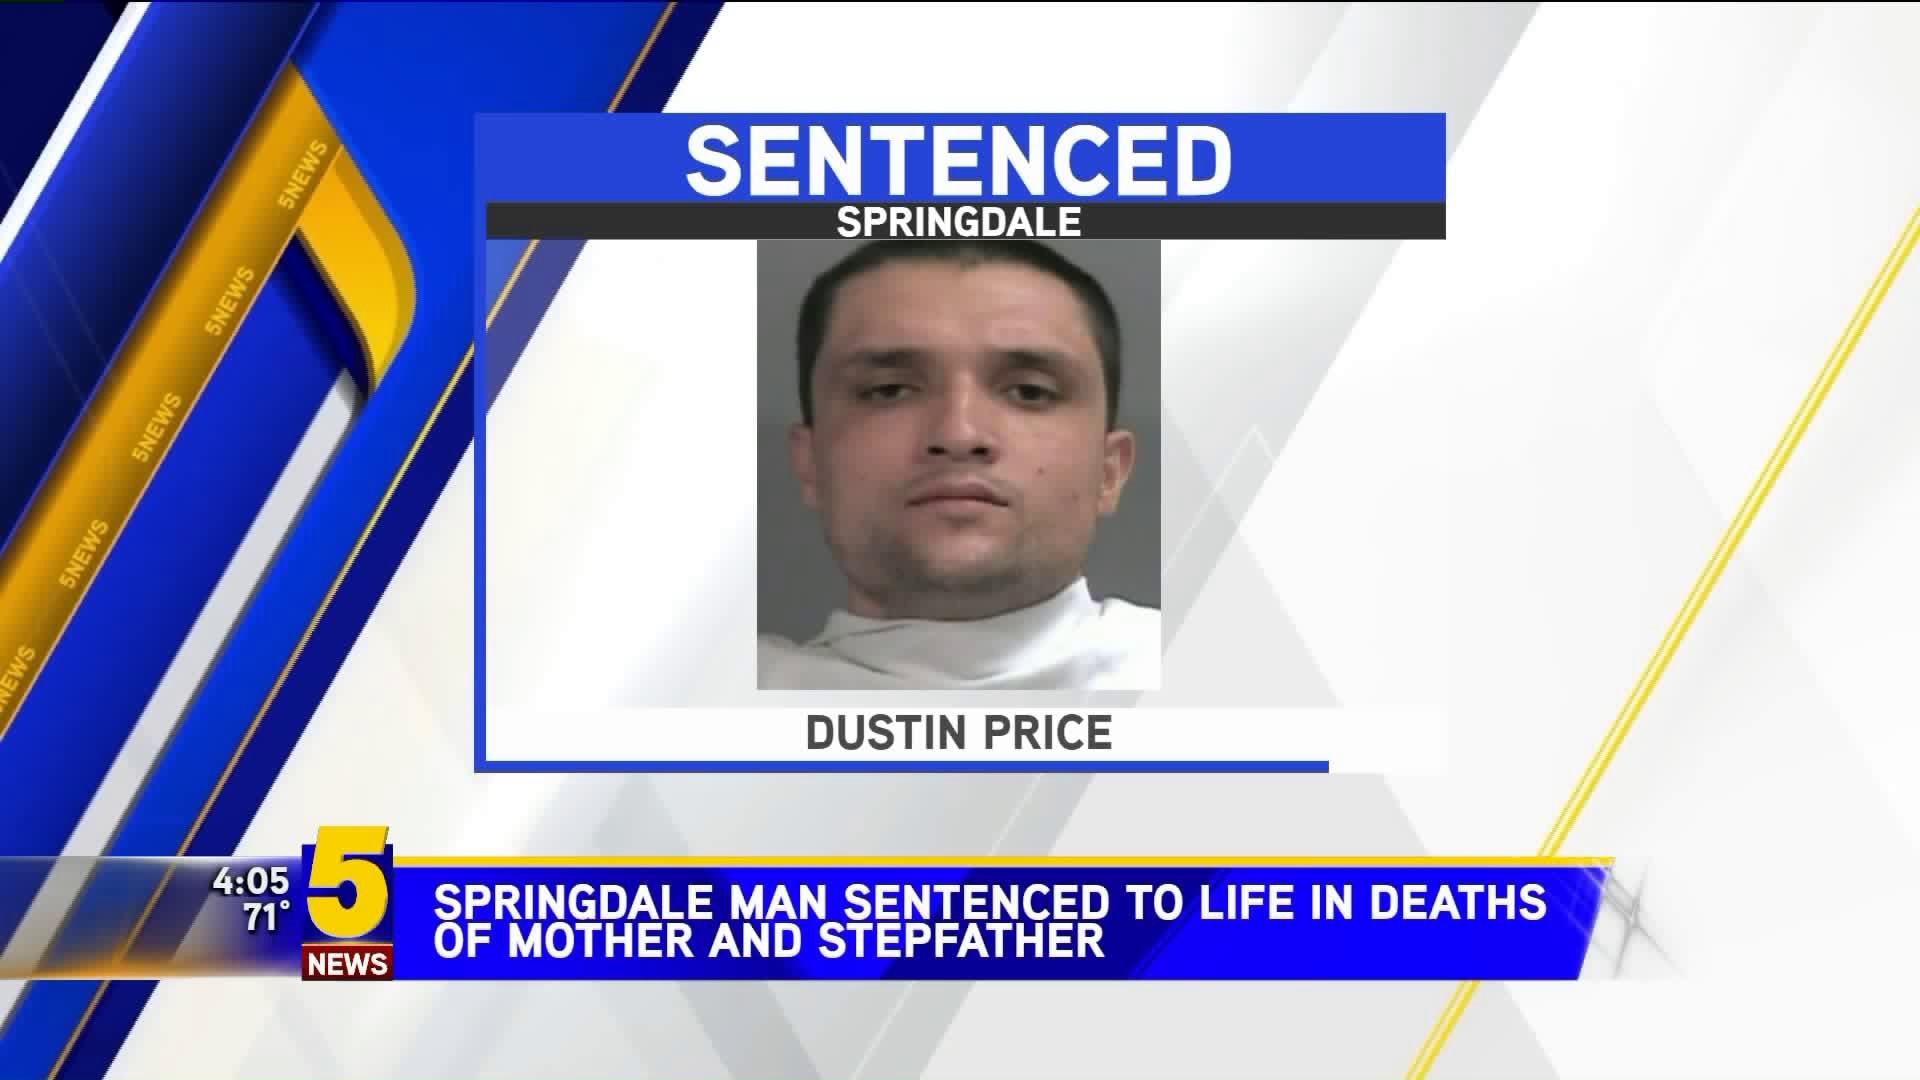 Springdale Man Sentenced in Deaths of Mother and Stepfather